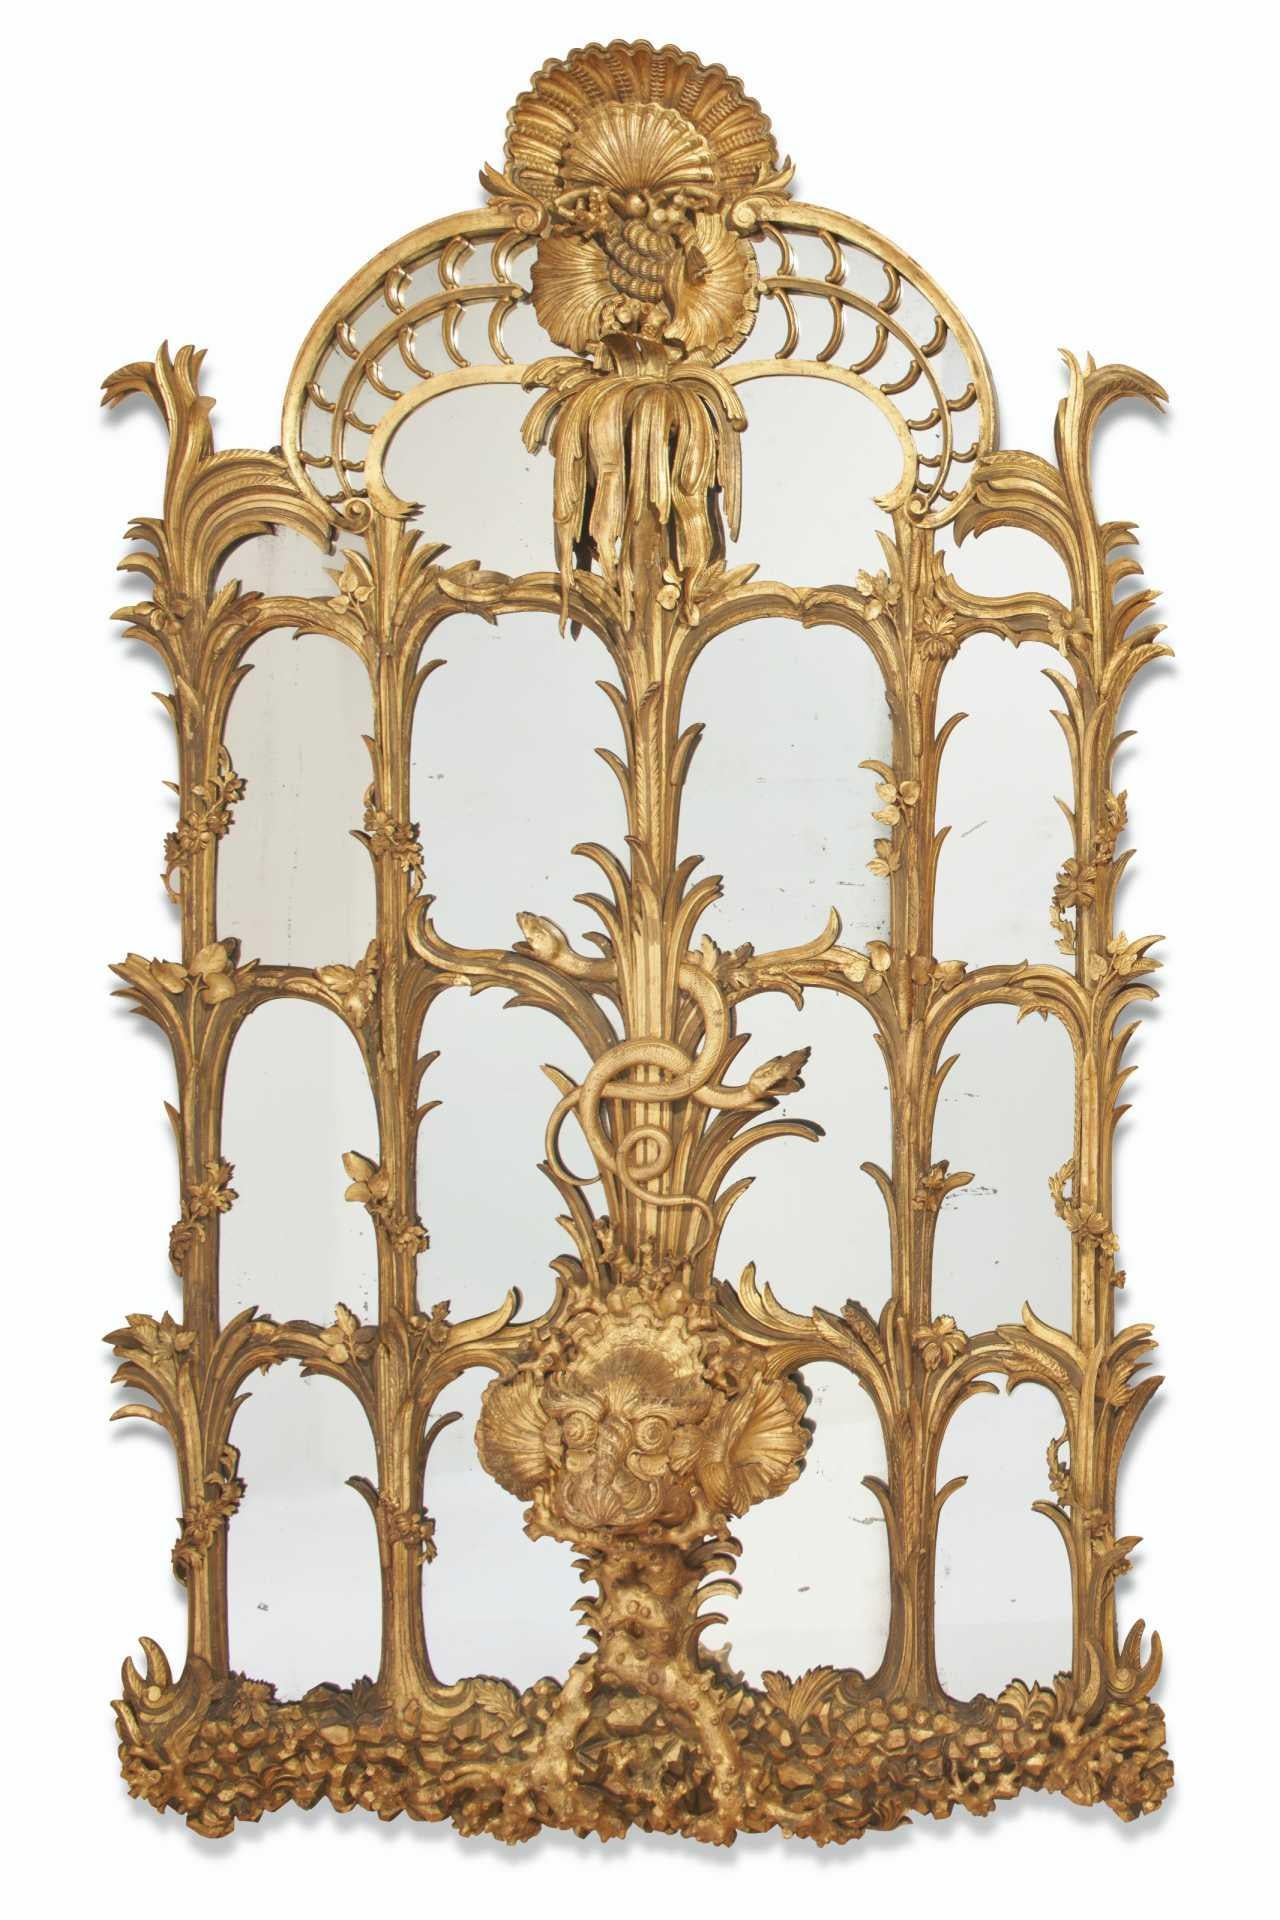 Our pair of monumental European giltwood mirrors each measure approximately 50 by 84 inches (213.5 by 127 cm), and feature extraordinary carved giltwood designs of marine life including seashells of various shapes, snakes, dolphins and serpents. 